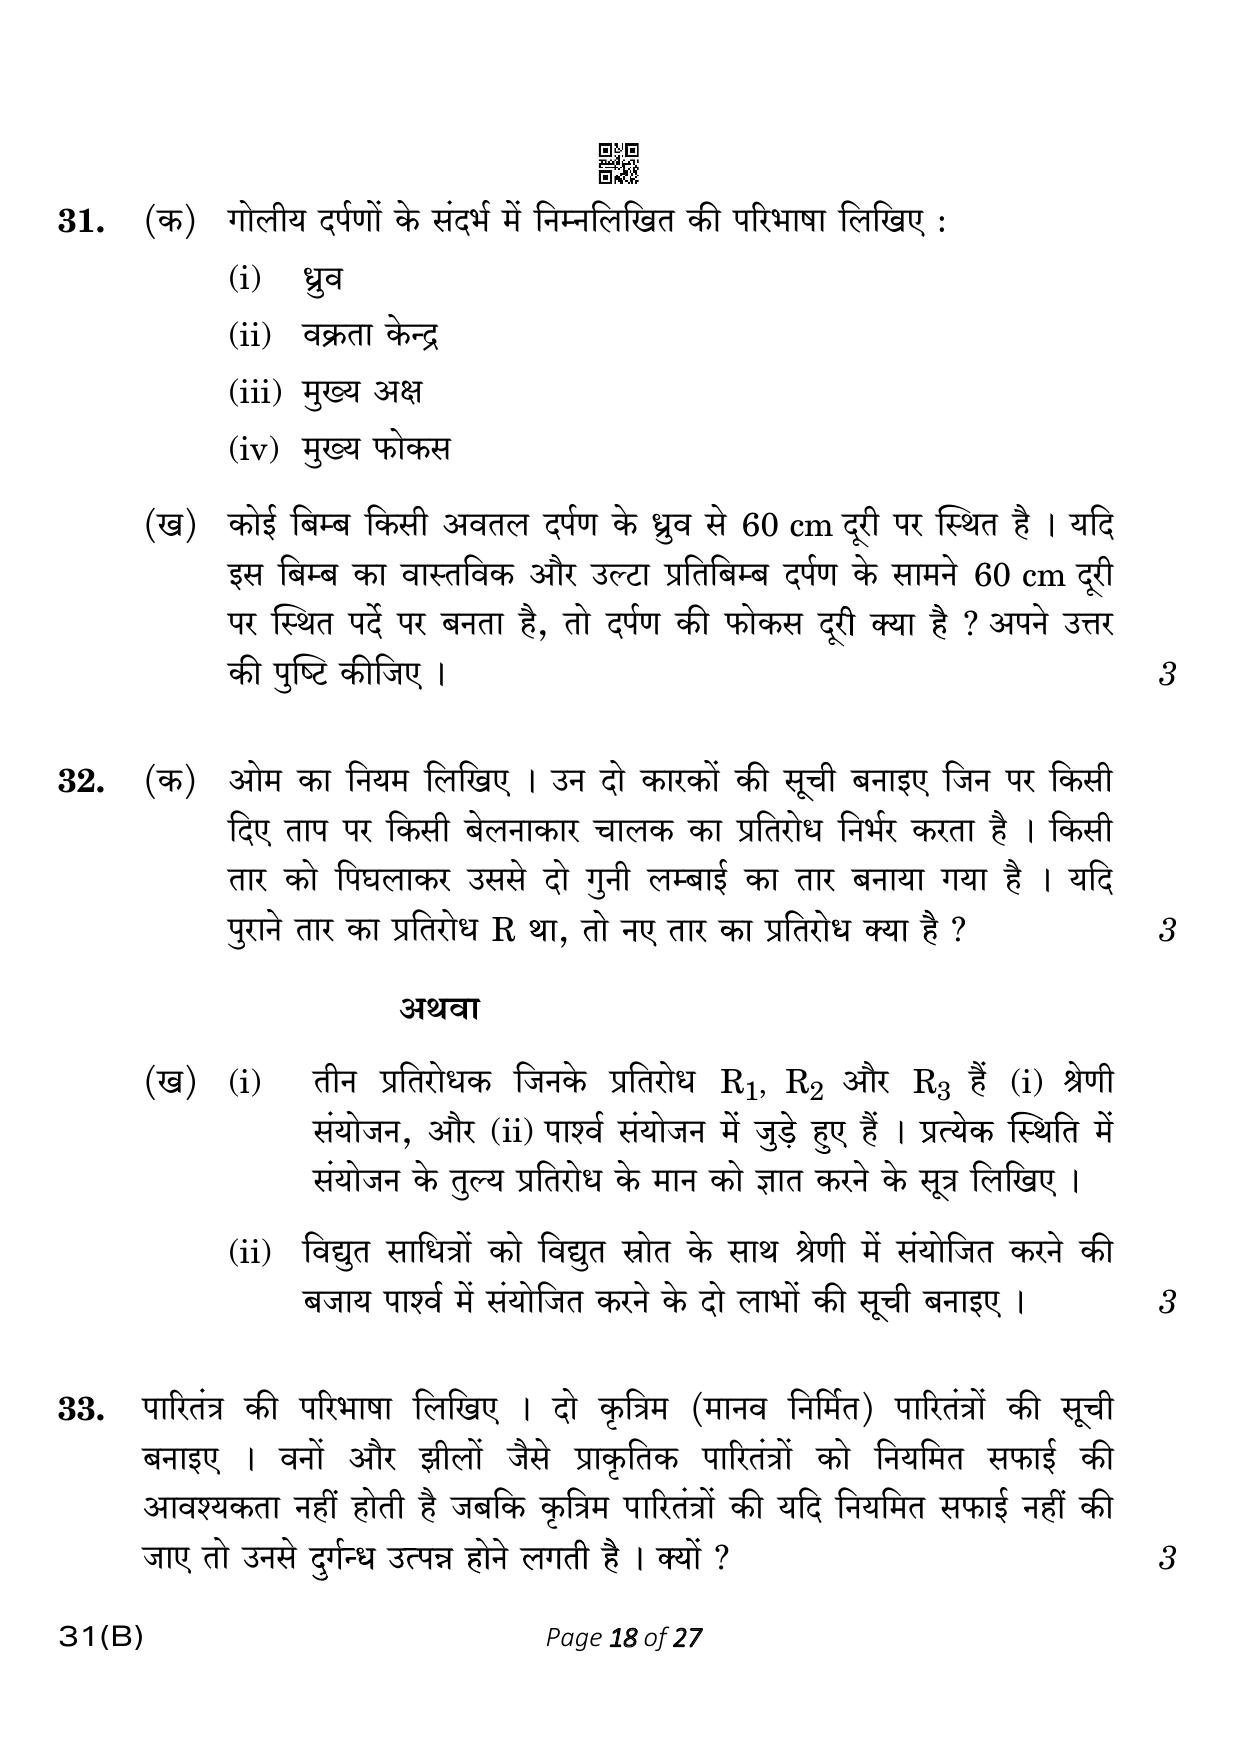 CBSE Class 10 31-B Science 2023 (Compartment) Question Paper - Page 18